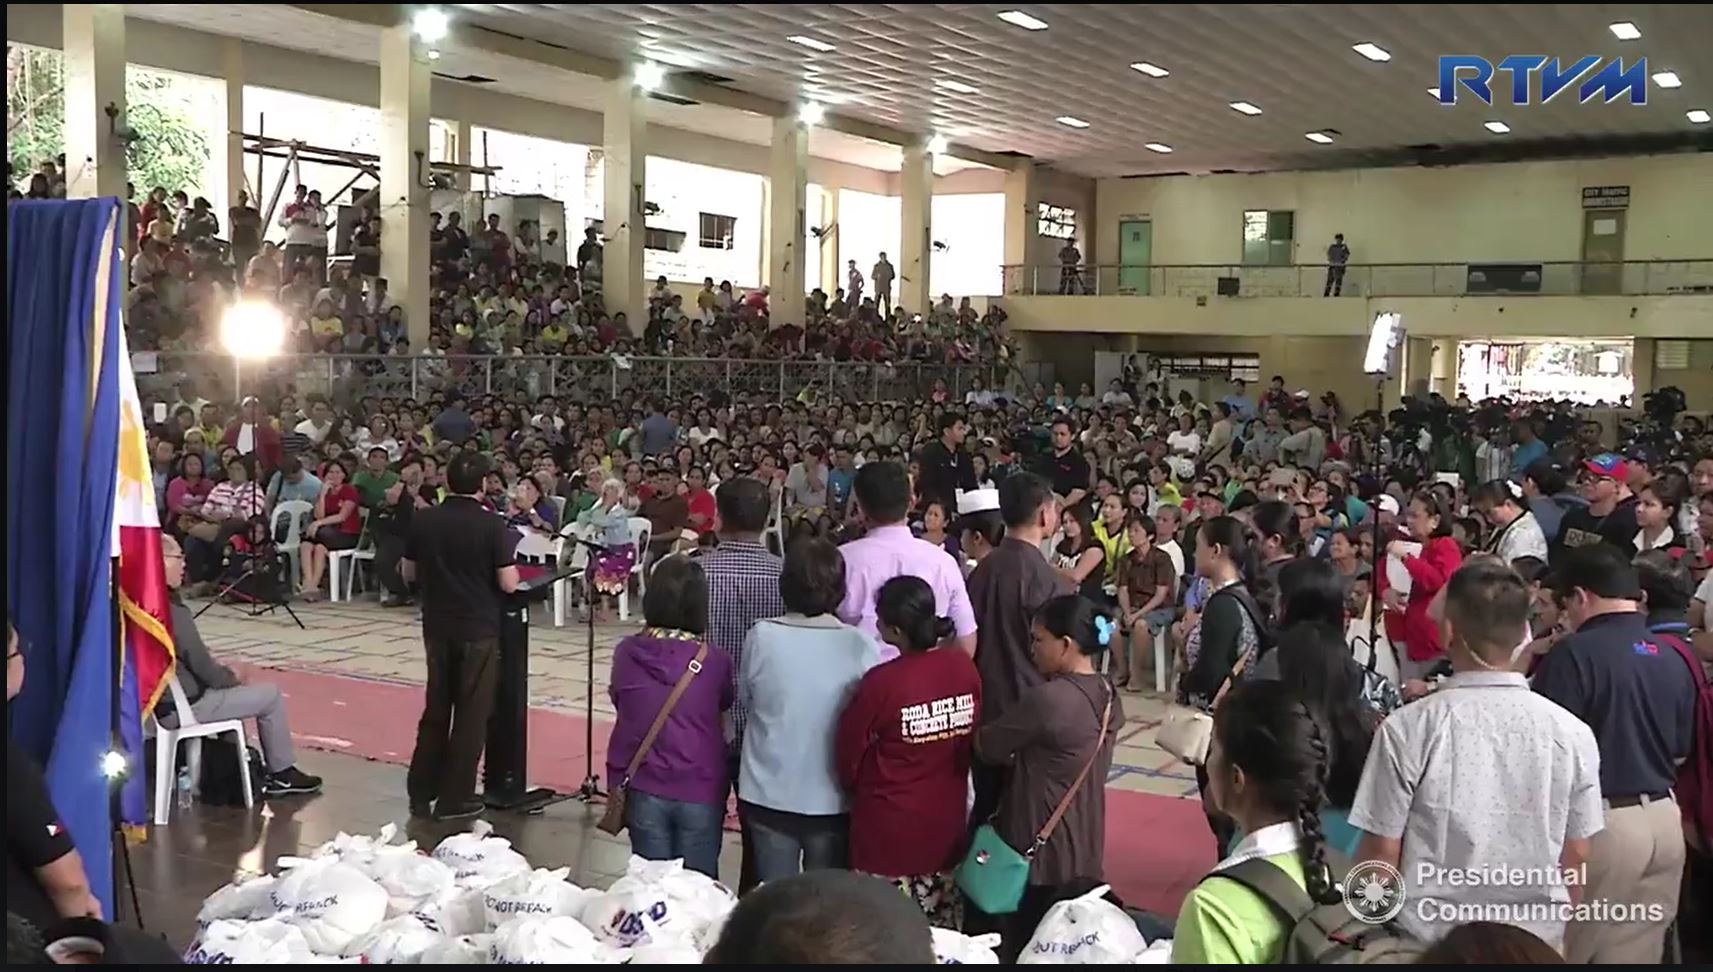 President Duterte addressing some of the quake victims in Surigao City gathered inside the Surigao City Hall Gymnasium. (photo grabbed from RTVM video)